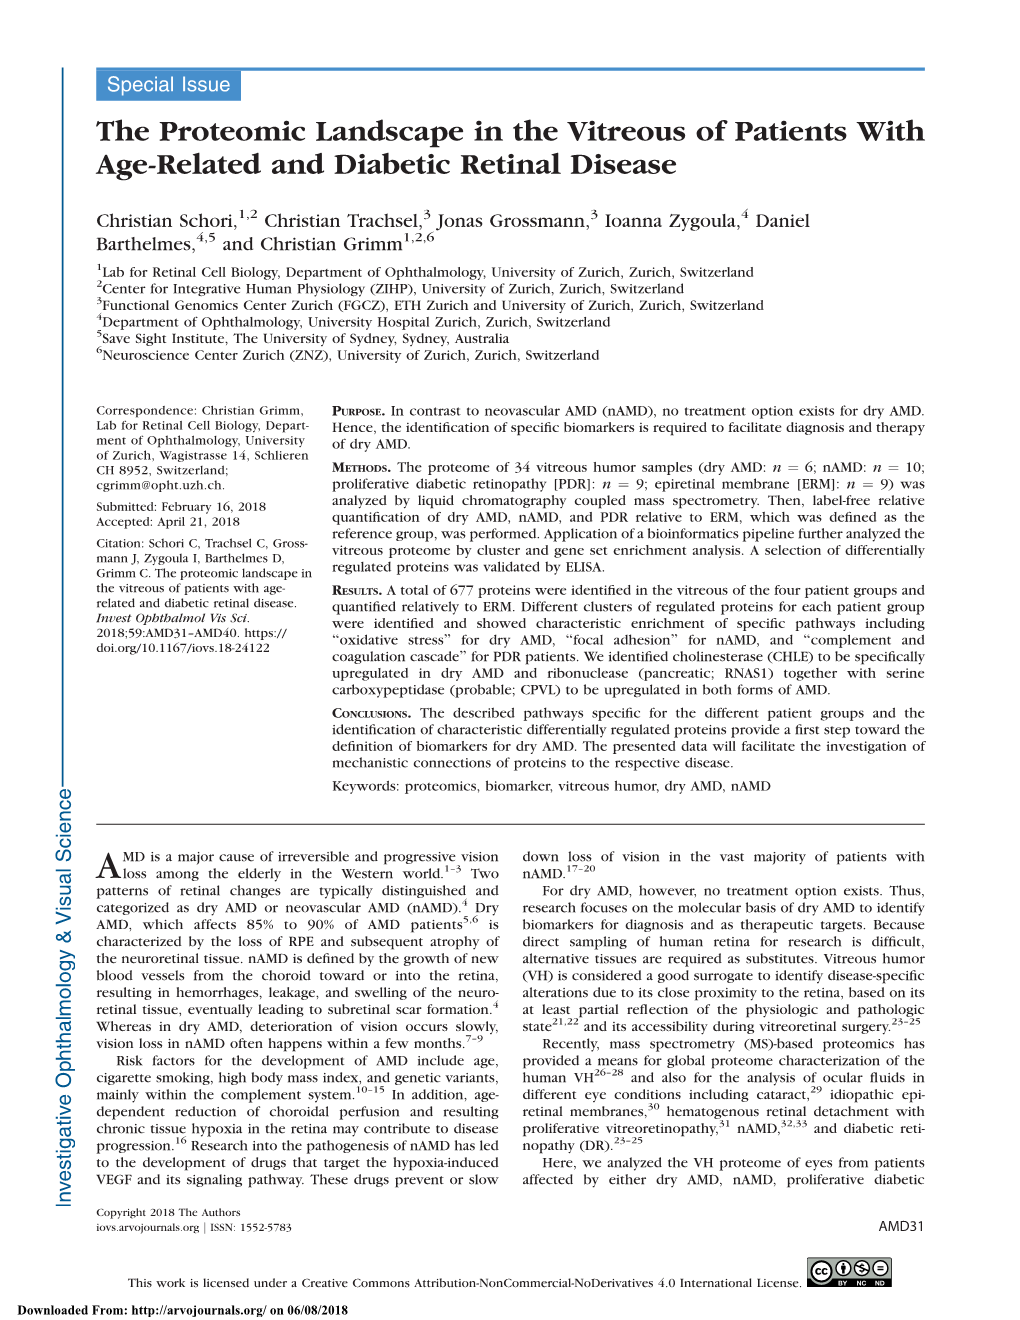 The Proteomic Landscape in the Vitreous of Patients with Age-Related and Diabetic Retinal Disease